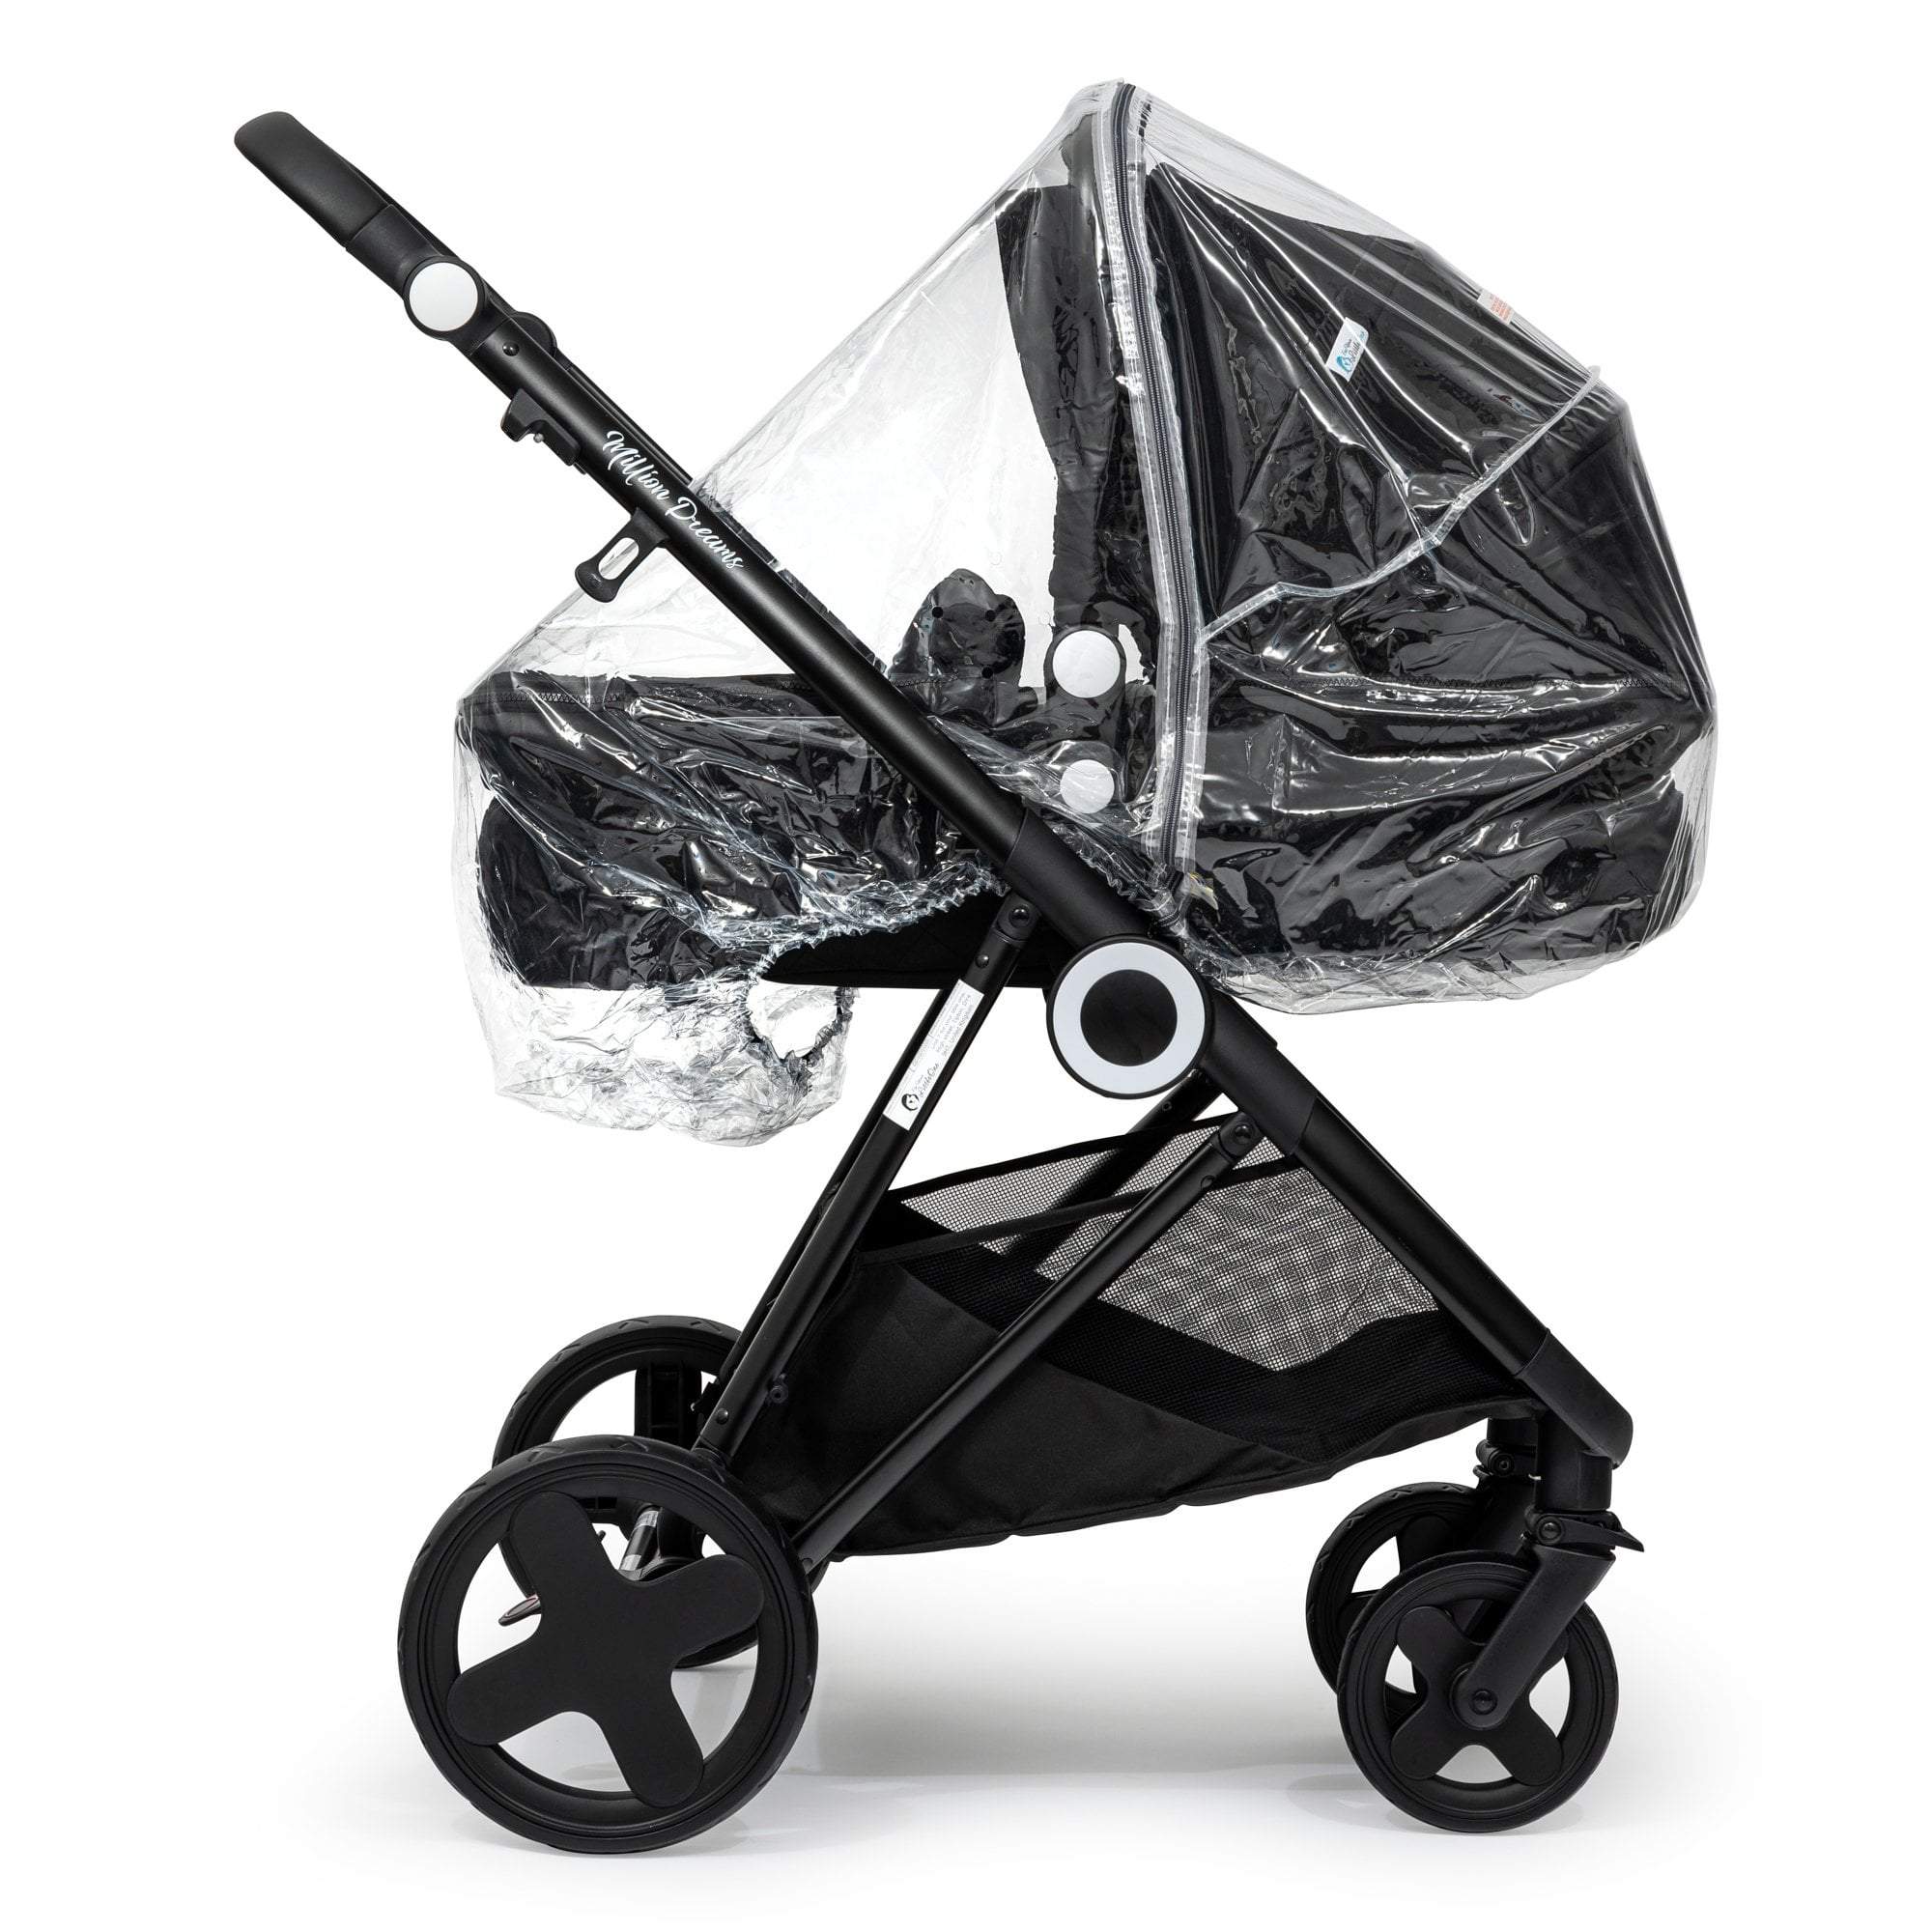 Carrycot Raincover Compatible With Greentom - Fits All Models - For Your Little One